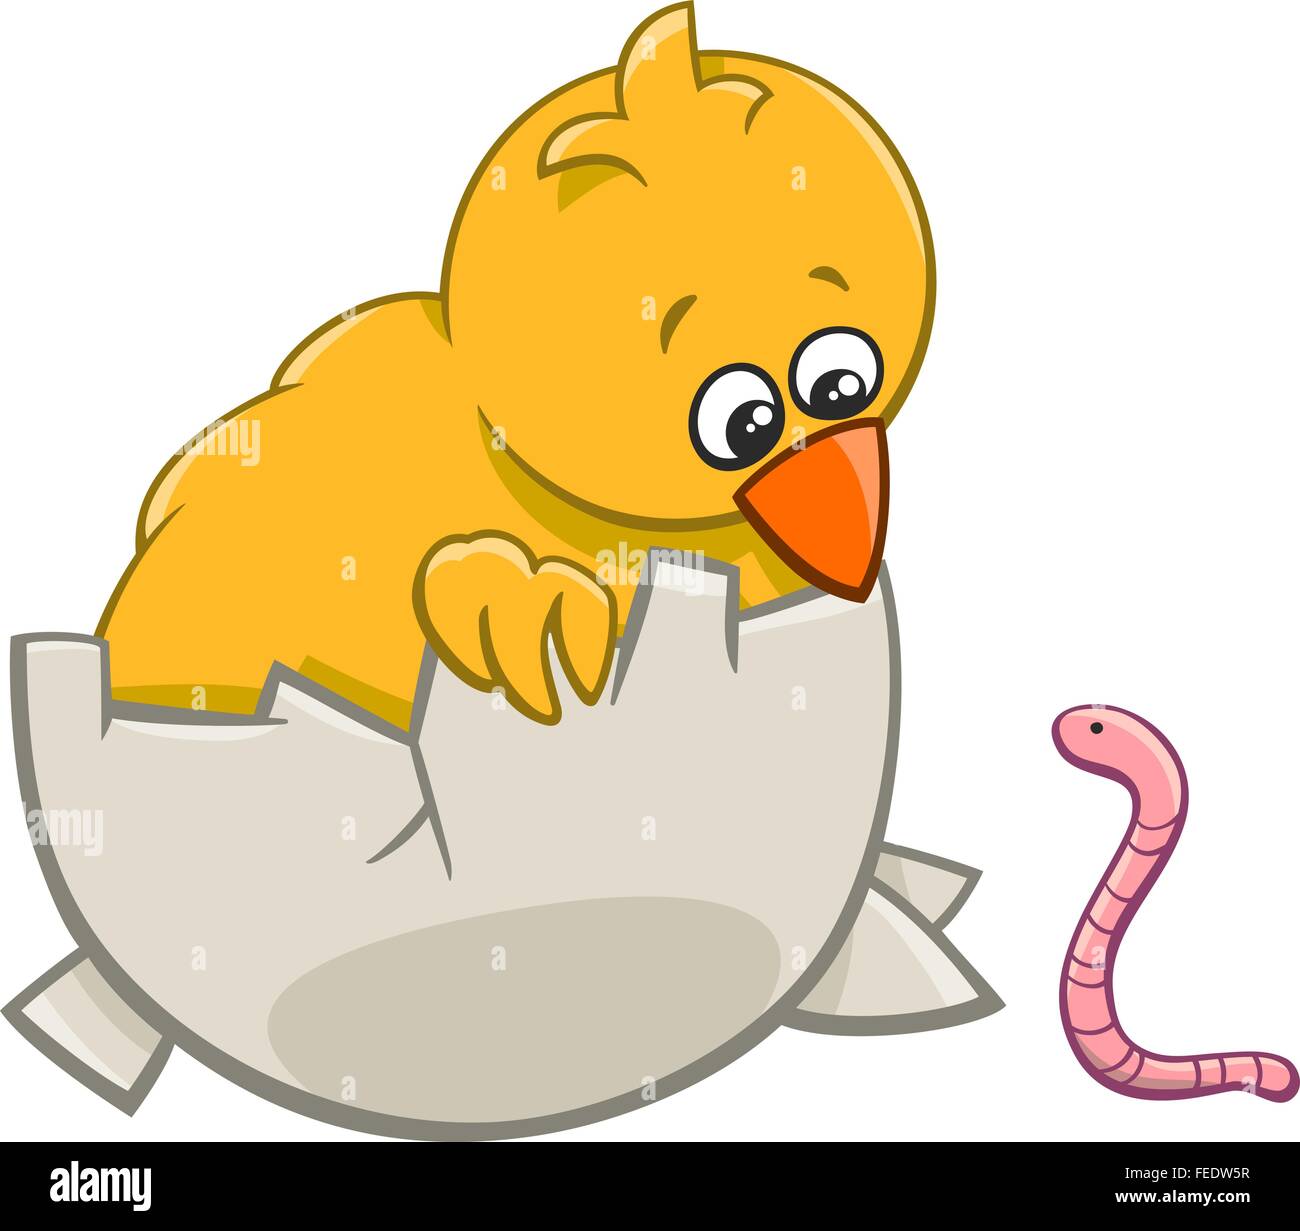 Cartoon Illustration of Little Chick in Egg and Earthworm Stock Vector